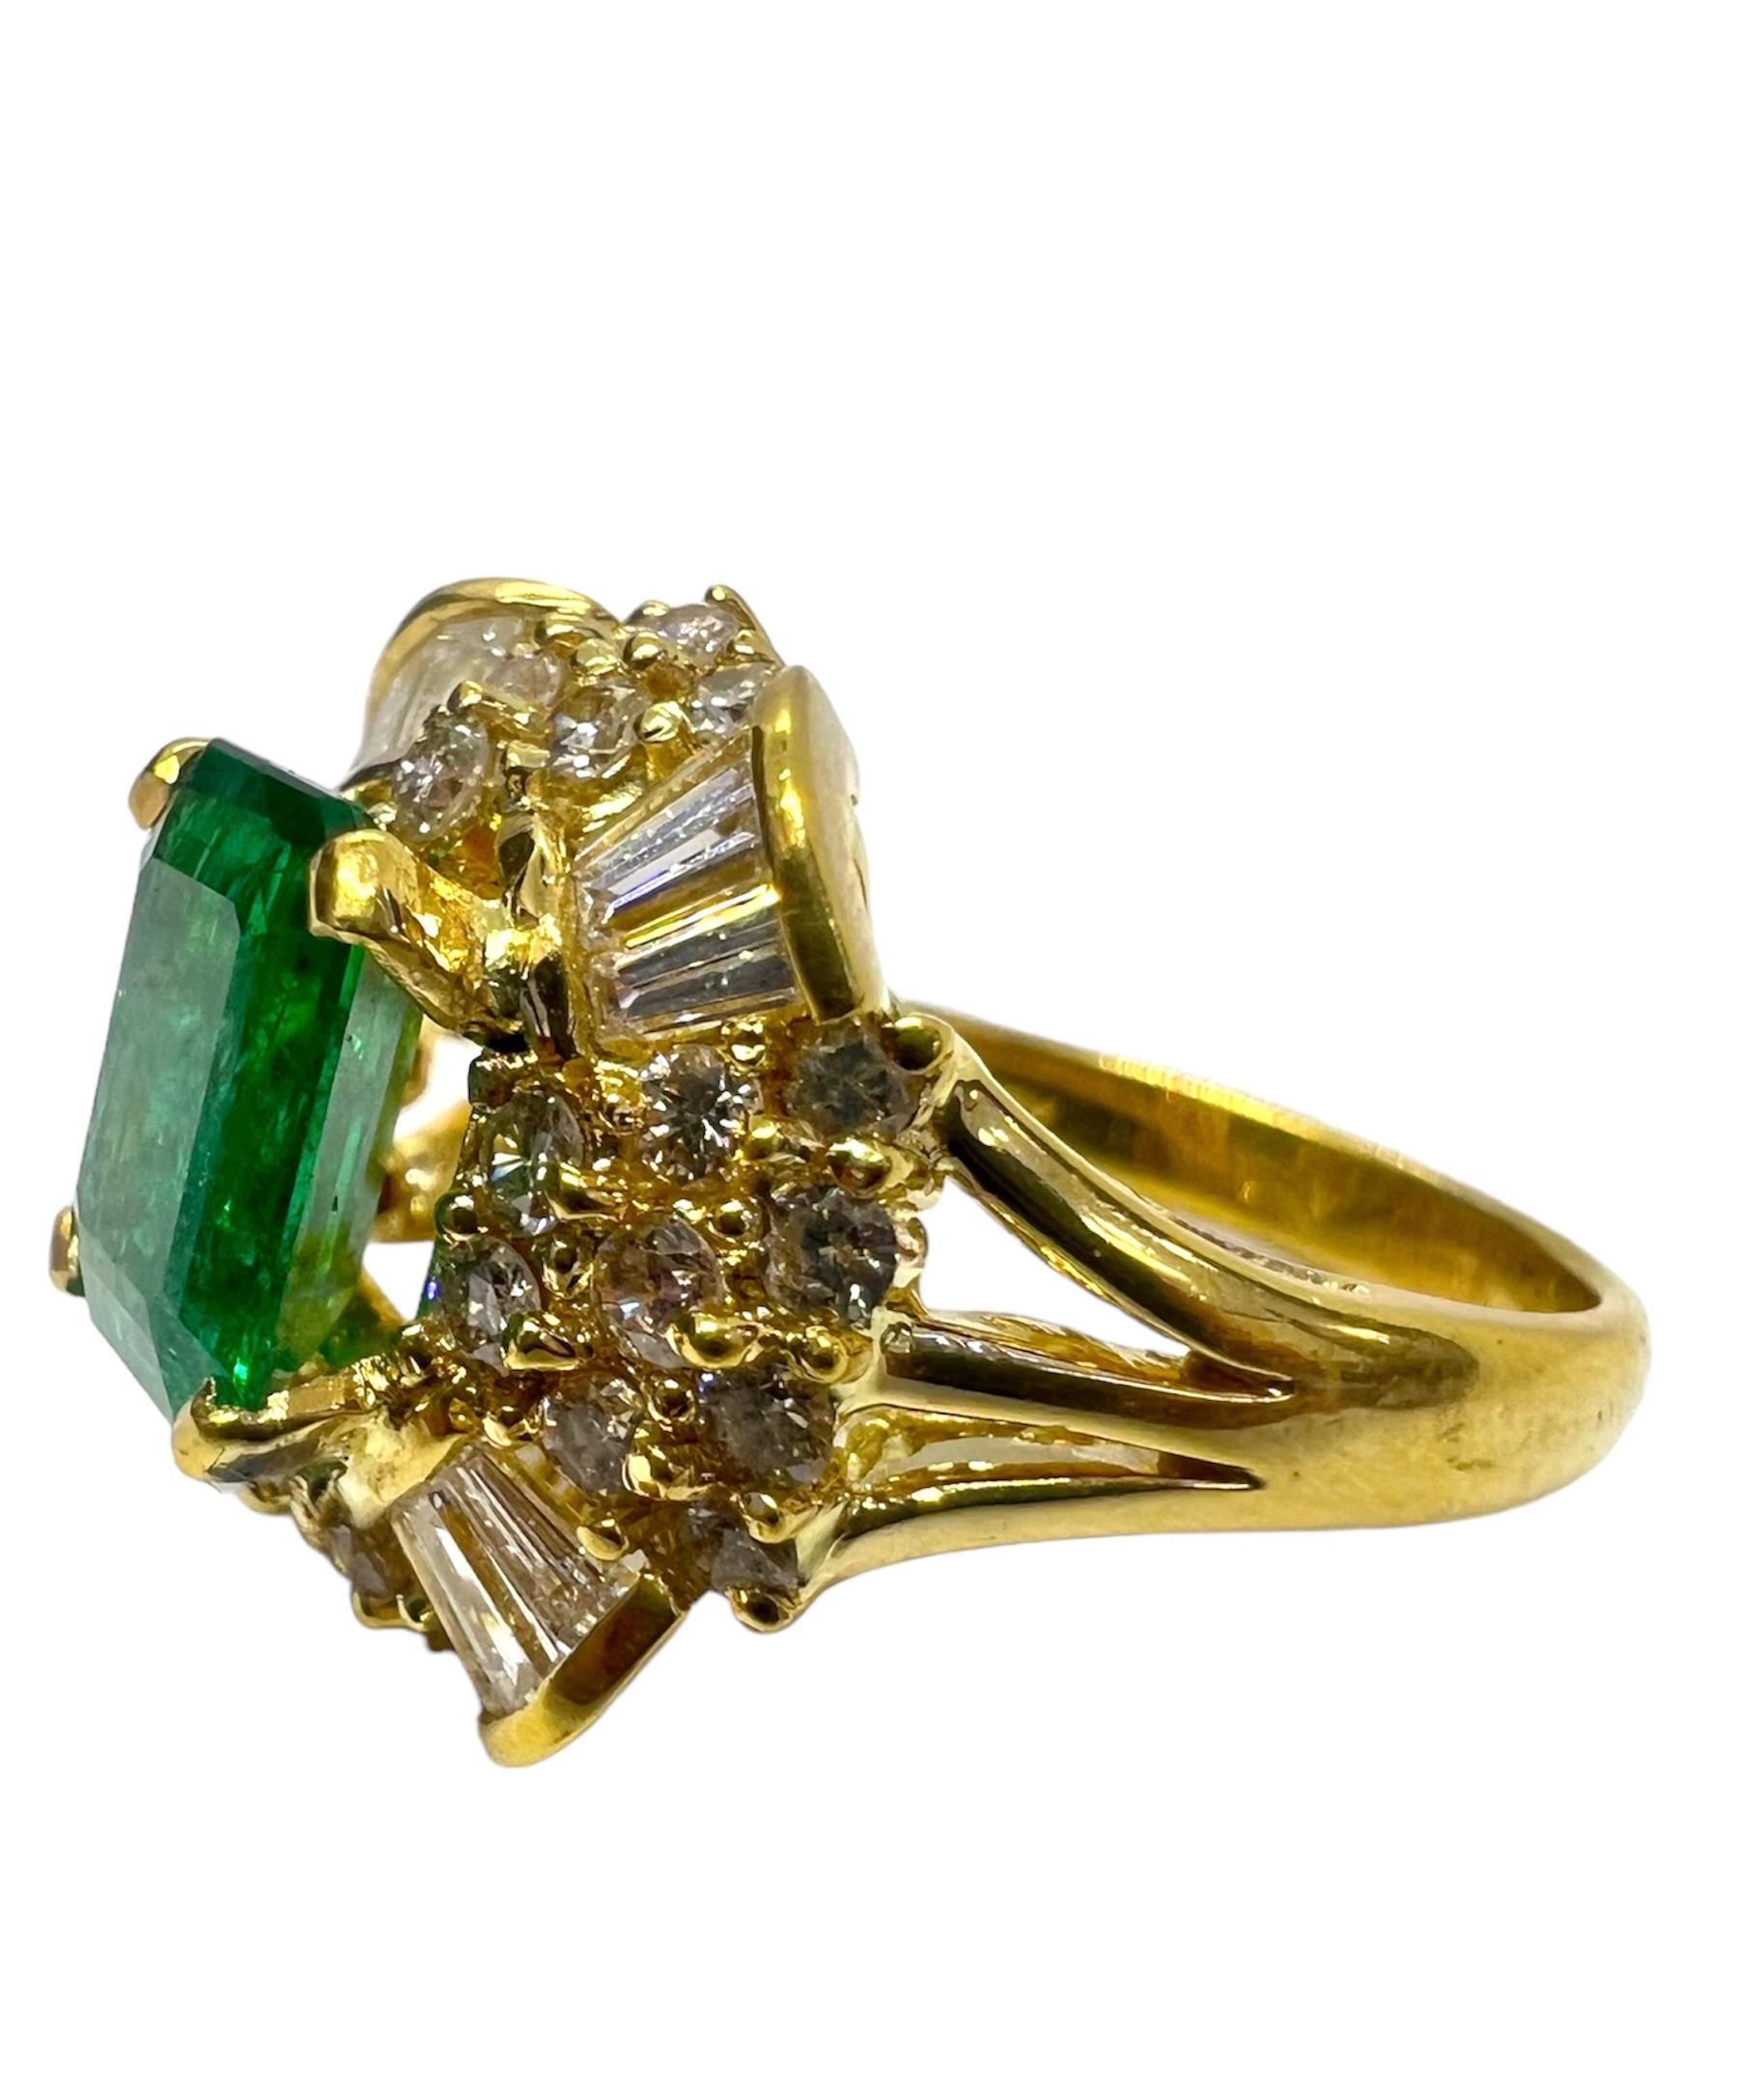 18K yellow gold ring with emerald stone and diamonds.

Sophia D by Joseph Dardashti LTD has been known worldwide for 35 years and are inspired by classic Art Deco design that merges with modern manufacturing techniques.